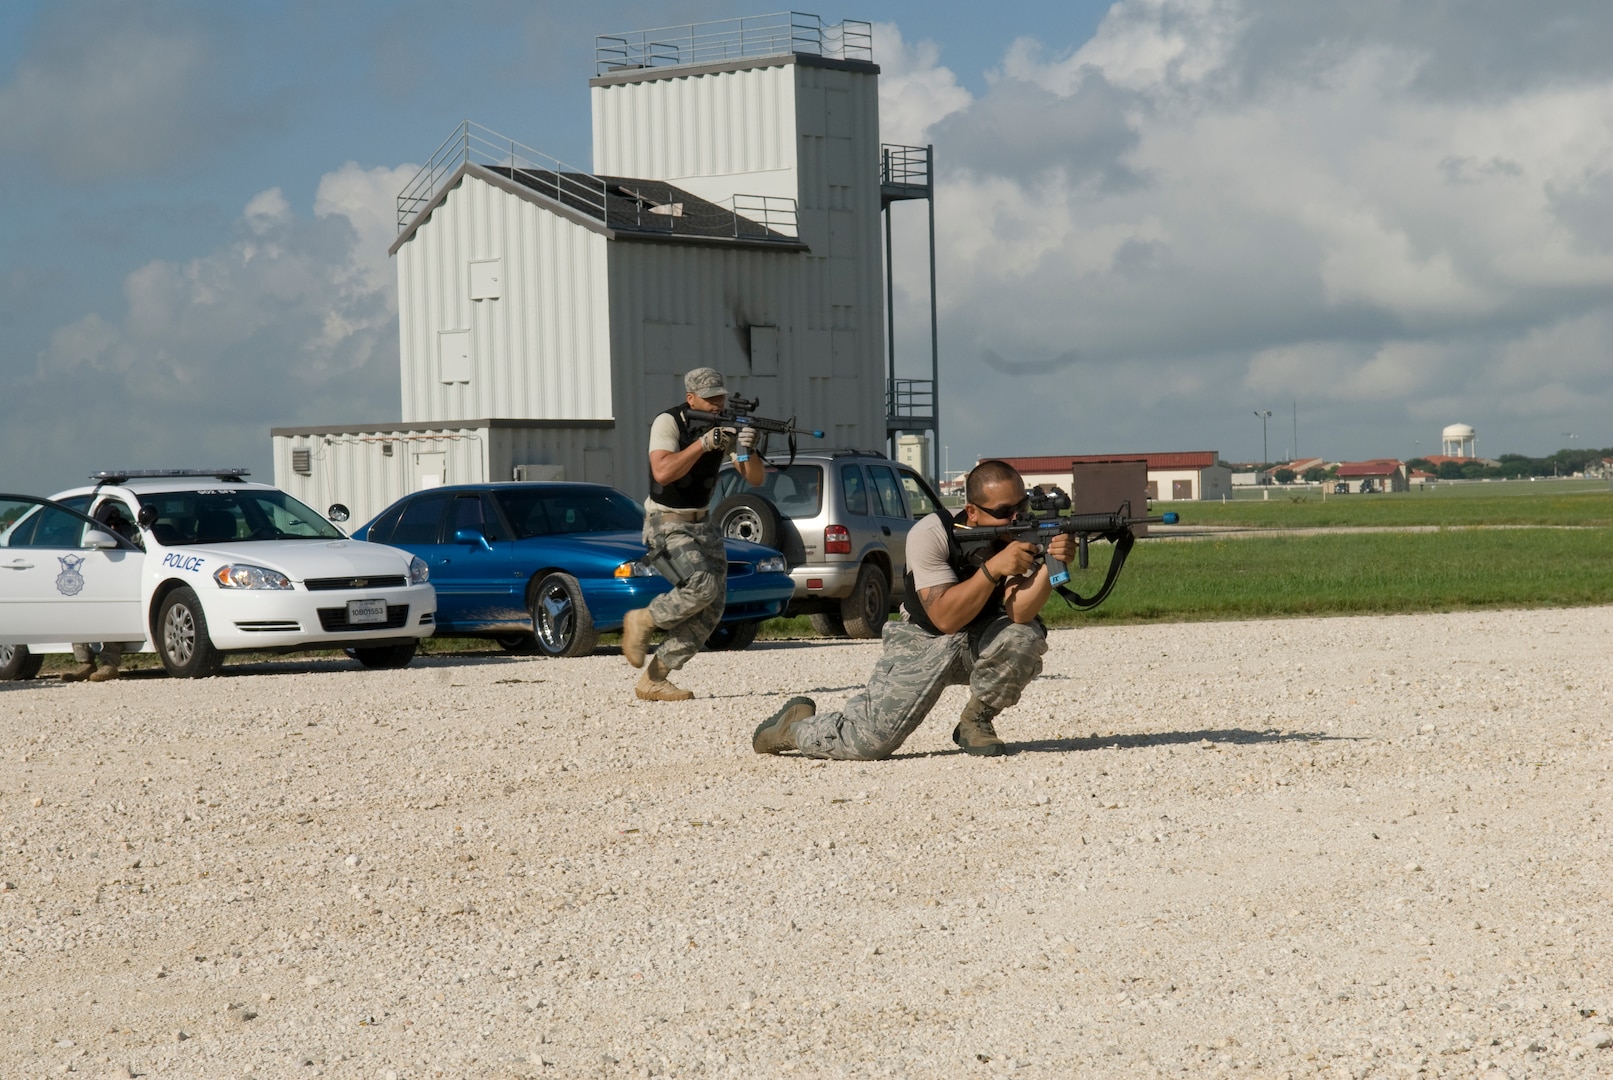 Staff Sgt. Jeffren Reyes and Sgt. Teron Mobley, 902 SFS Training, show proper technique of fire and cover advancing during a training class for evalulator training June 25 at Randolph Air Force Base, Texas.  (U.S. Air Force photo by Steve White)